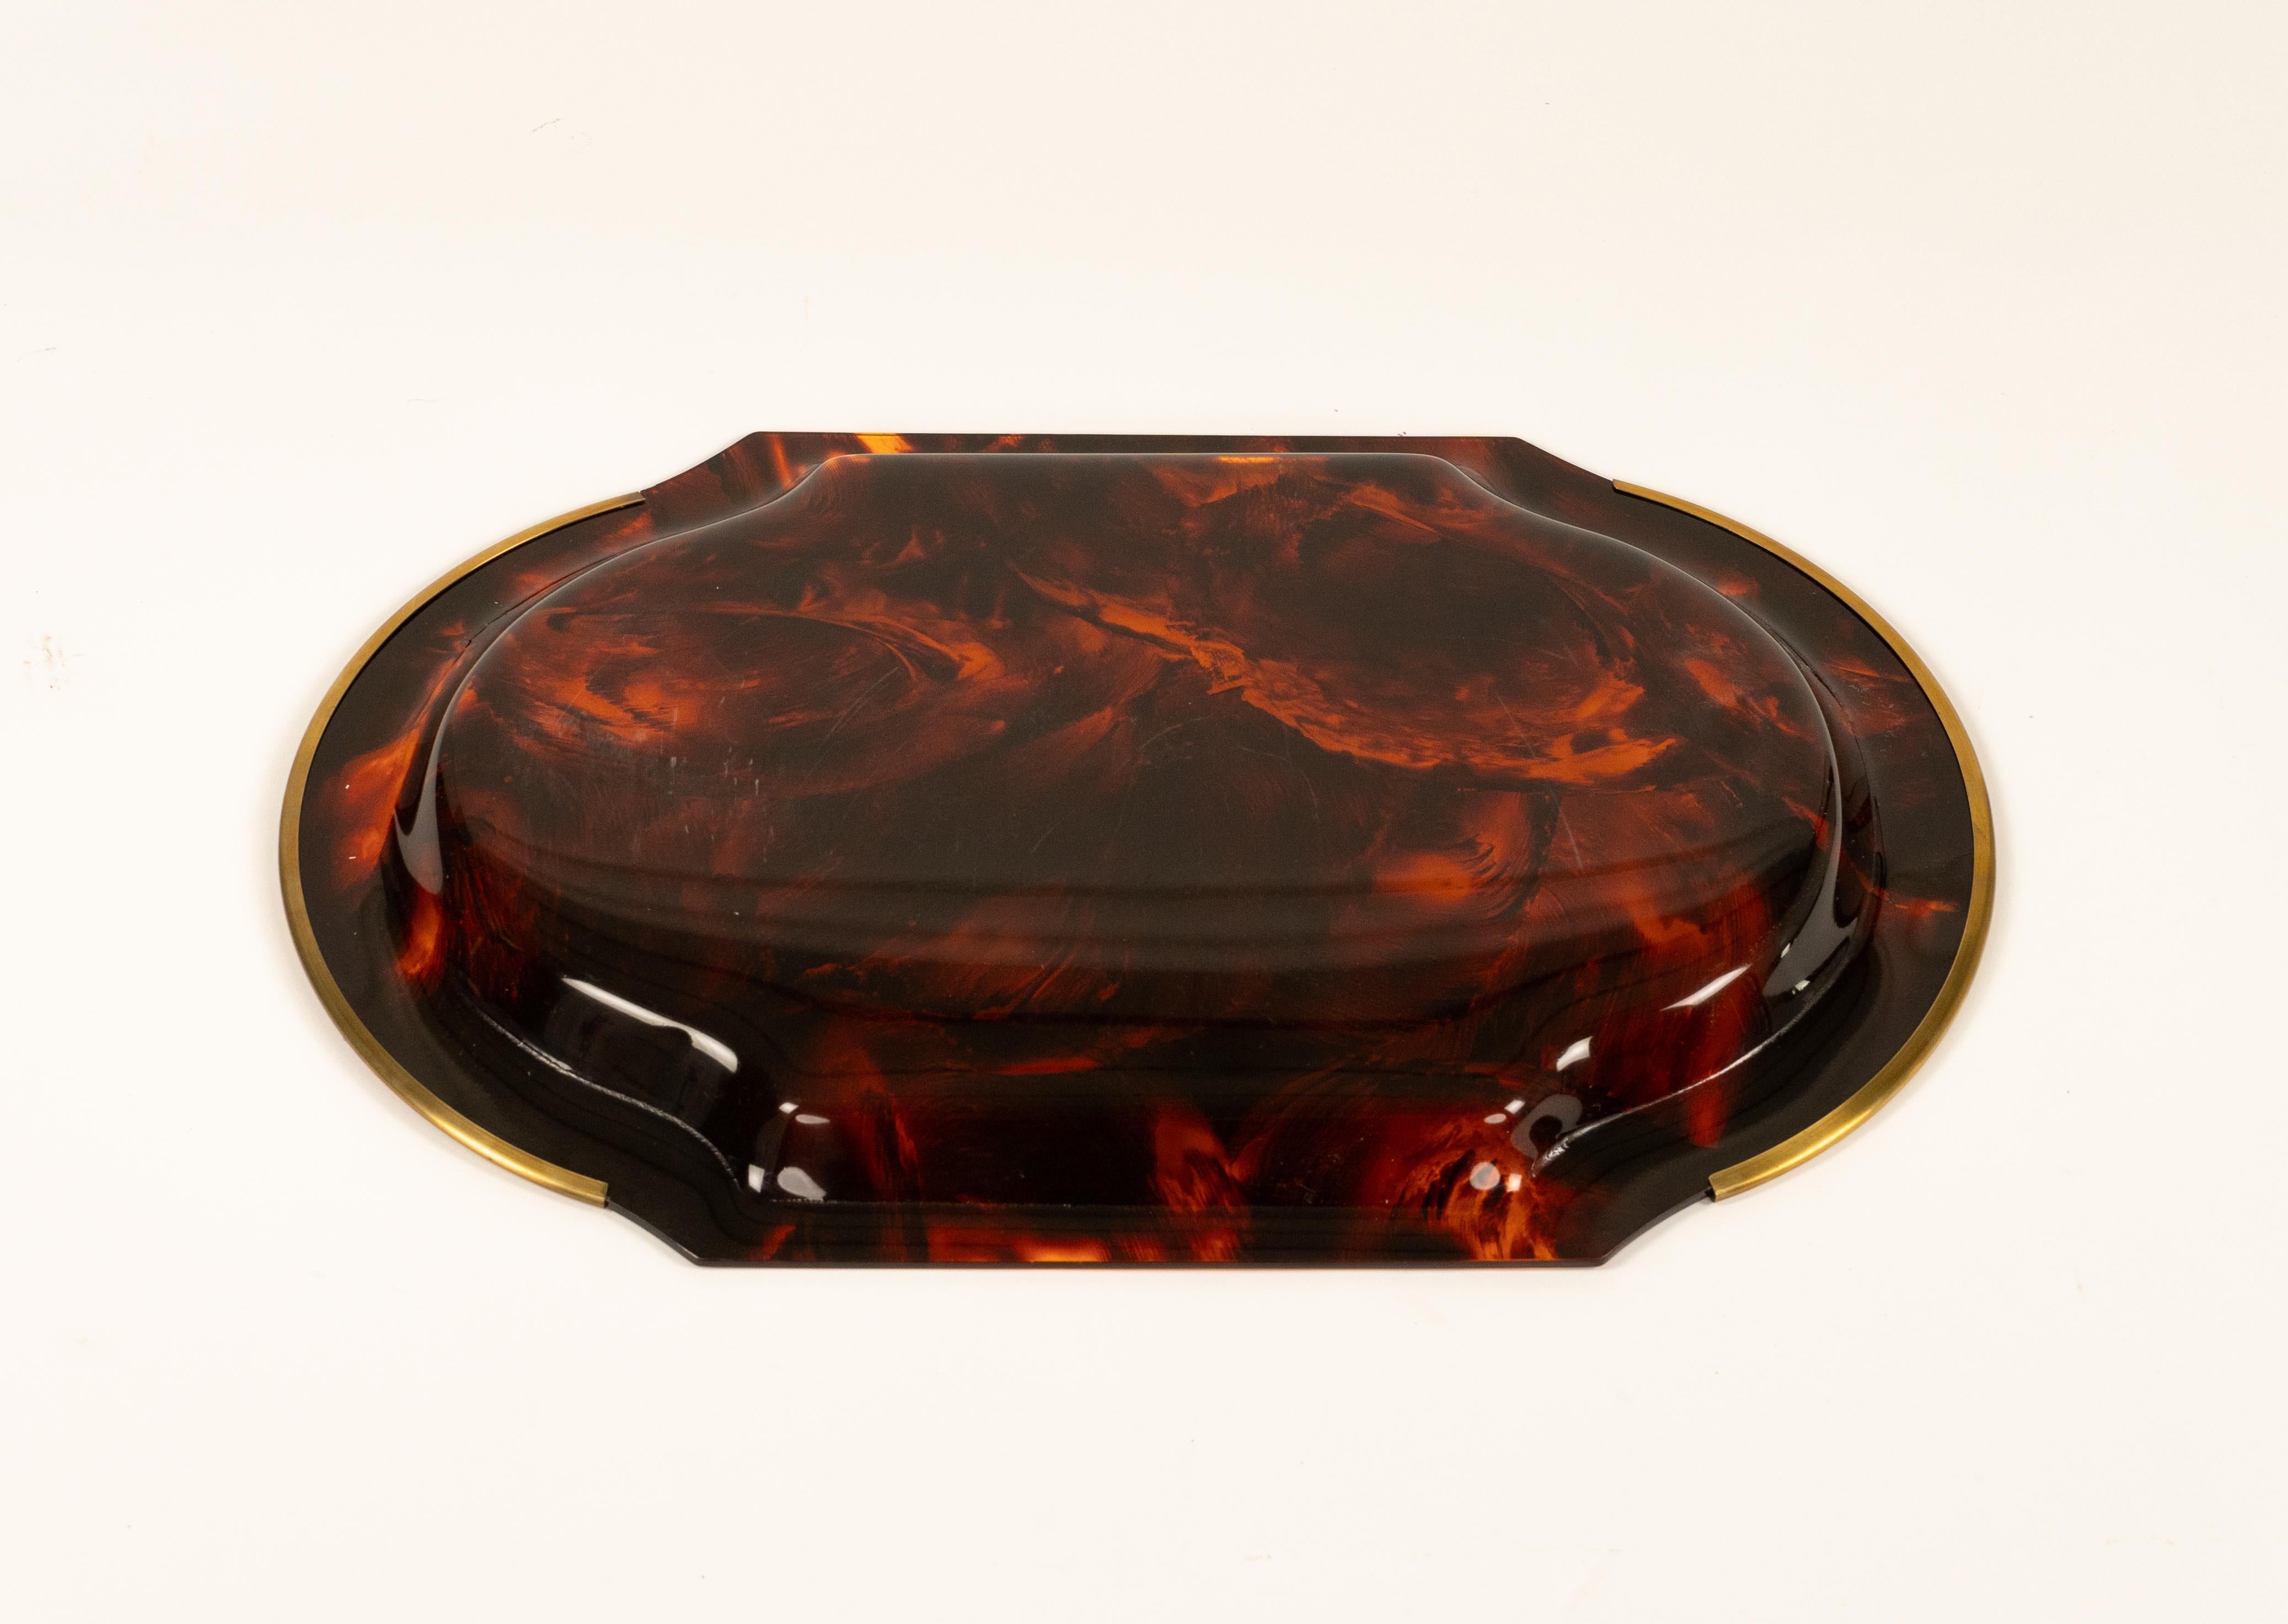 Serving Tray in Effect Tortoiseshell Lucite & Brass by Guzzini, Italy 1970s For Sale 5